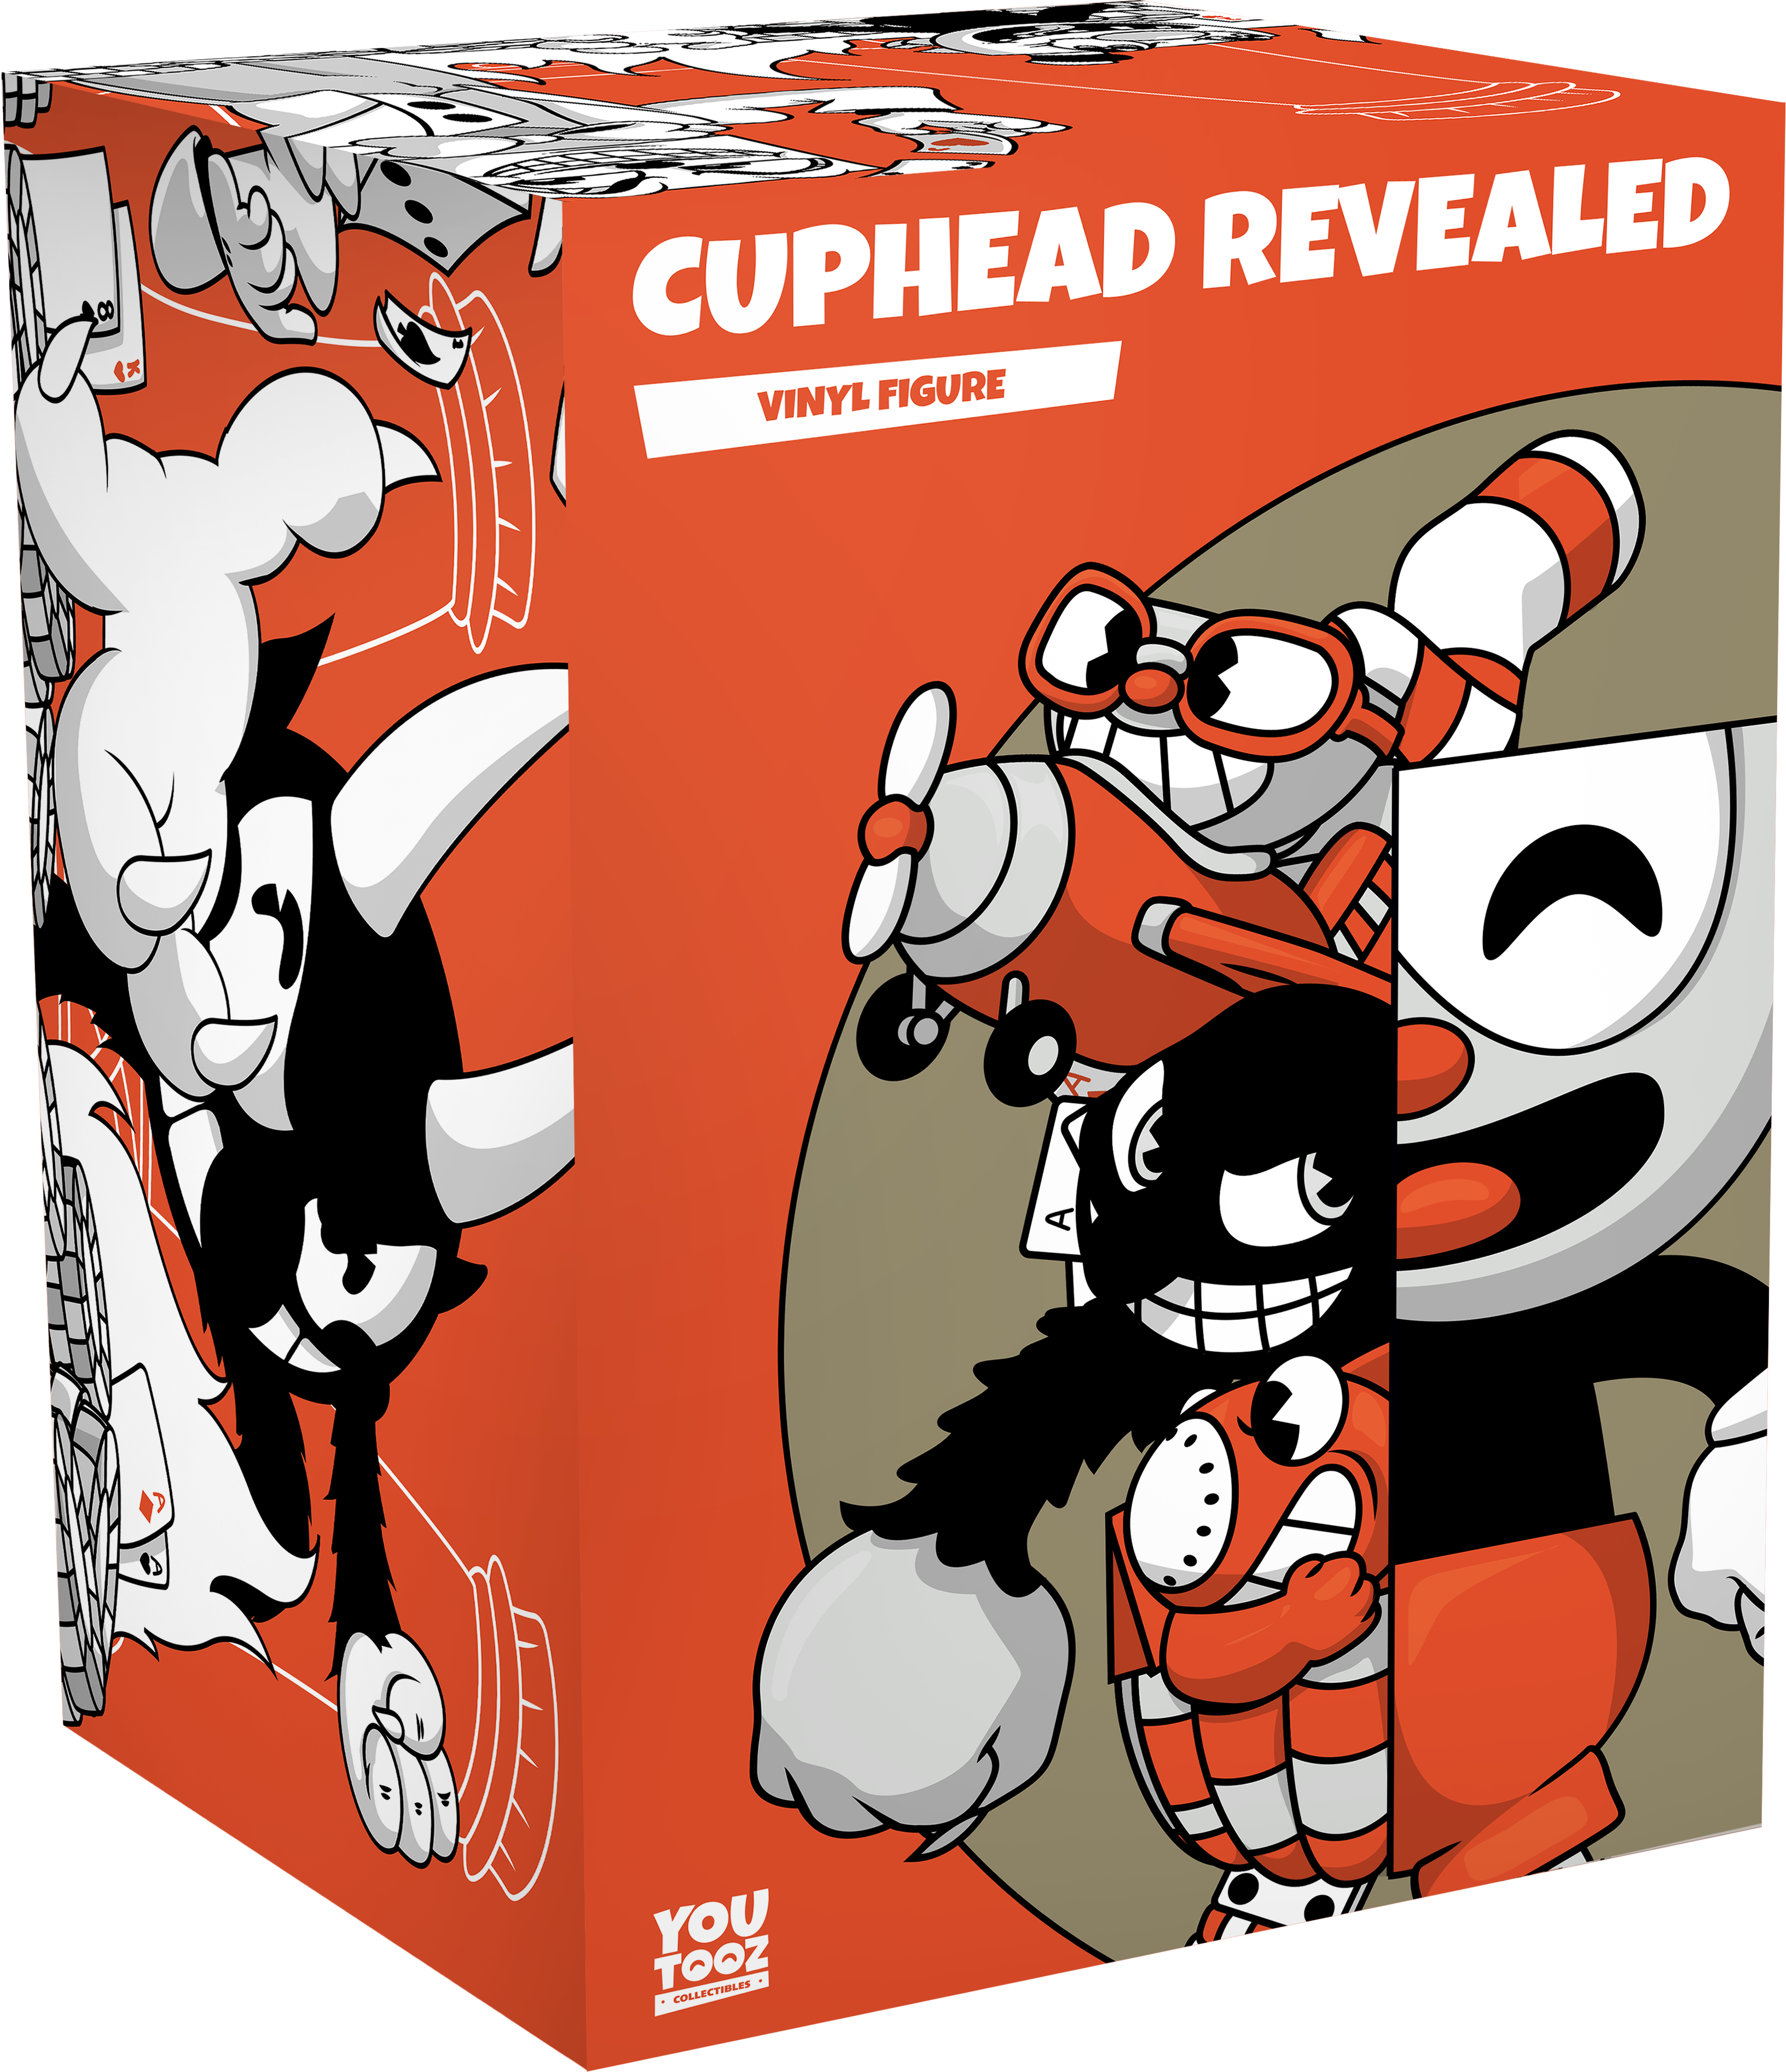 Coming to You in Full Color and Cine-Sound: The Cuphead Show